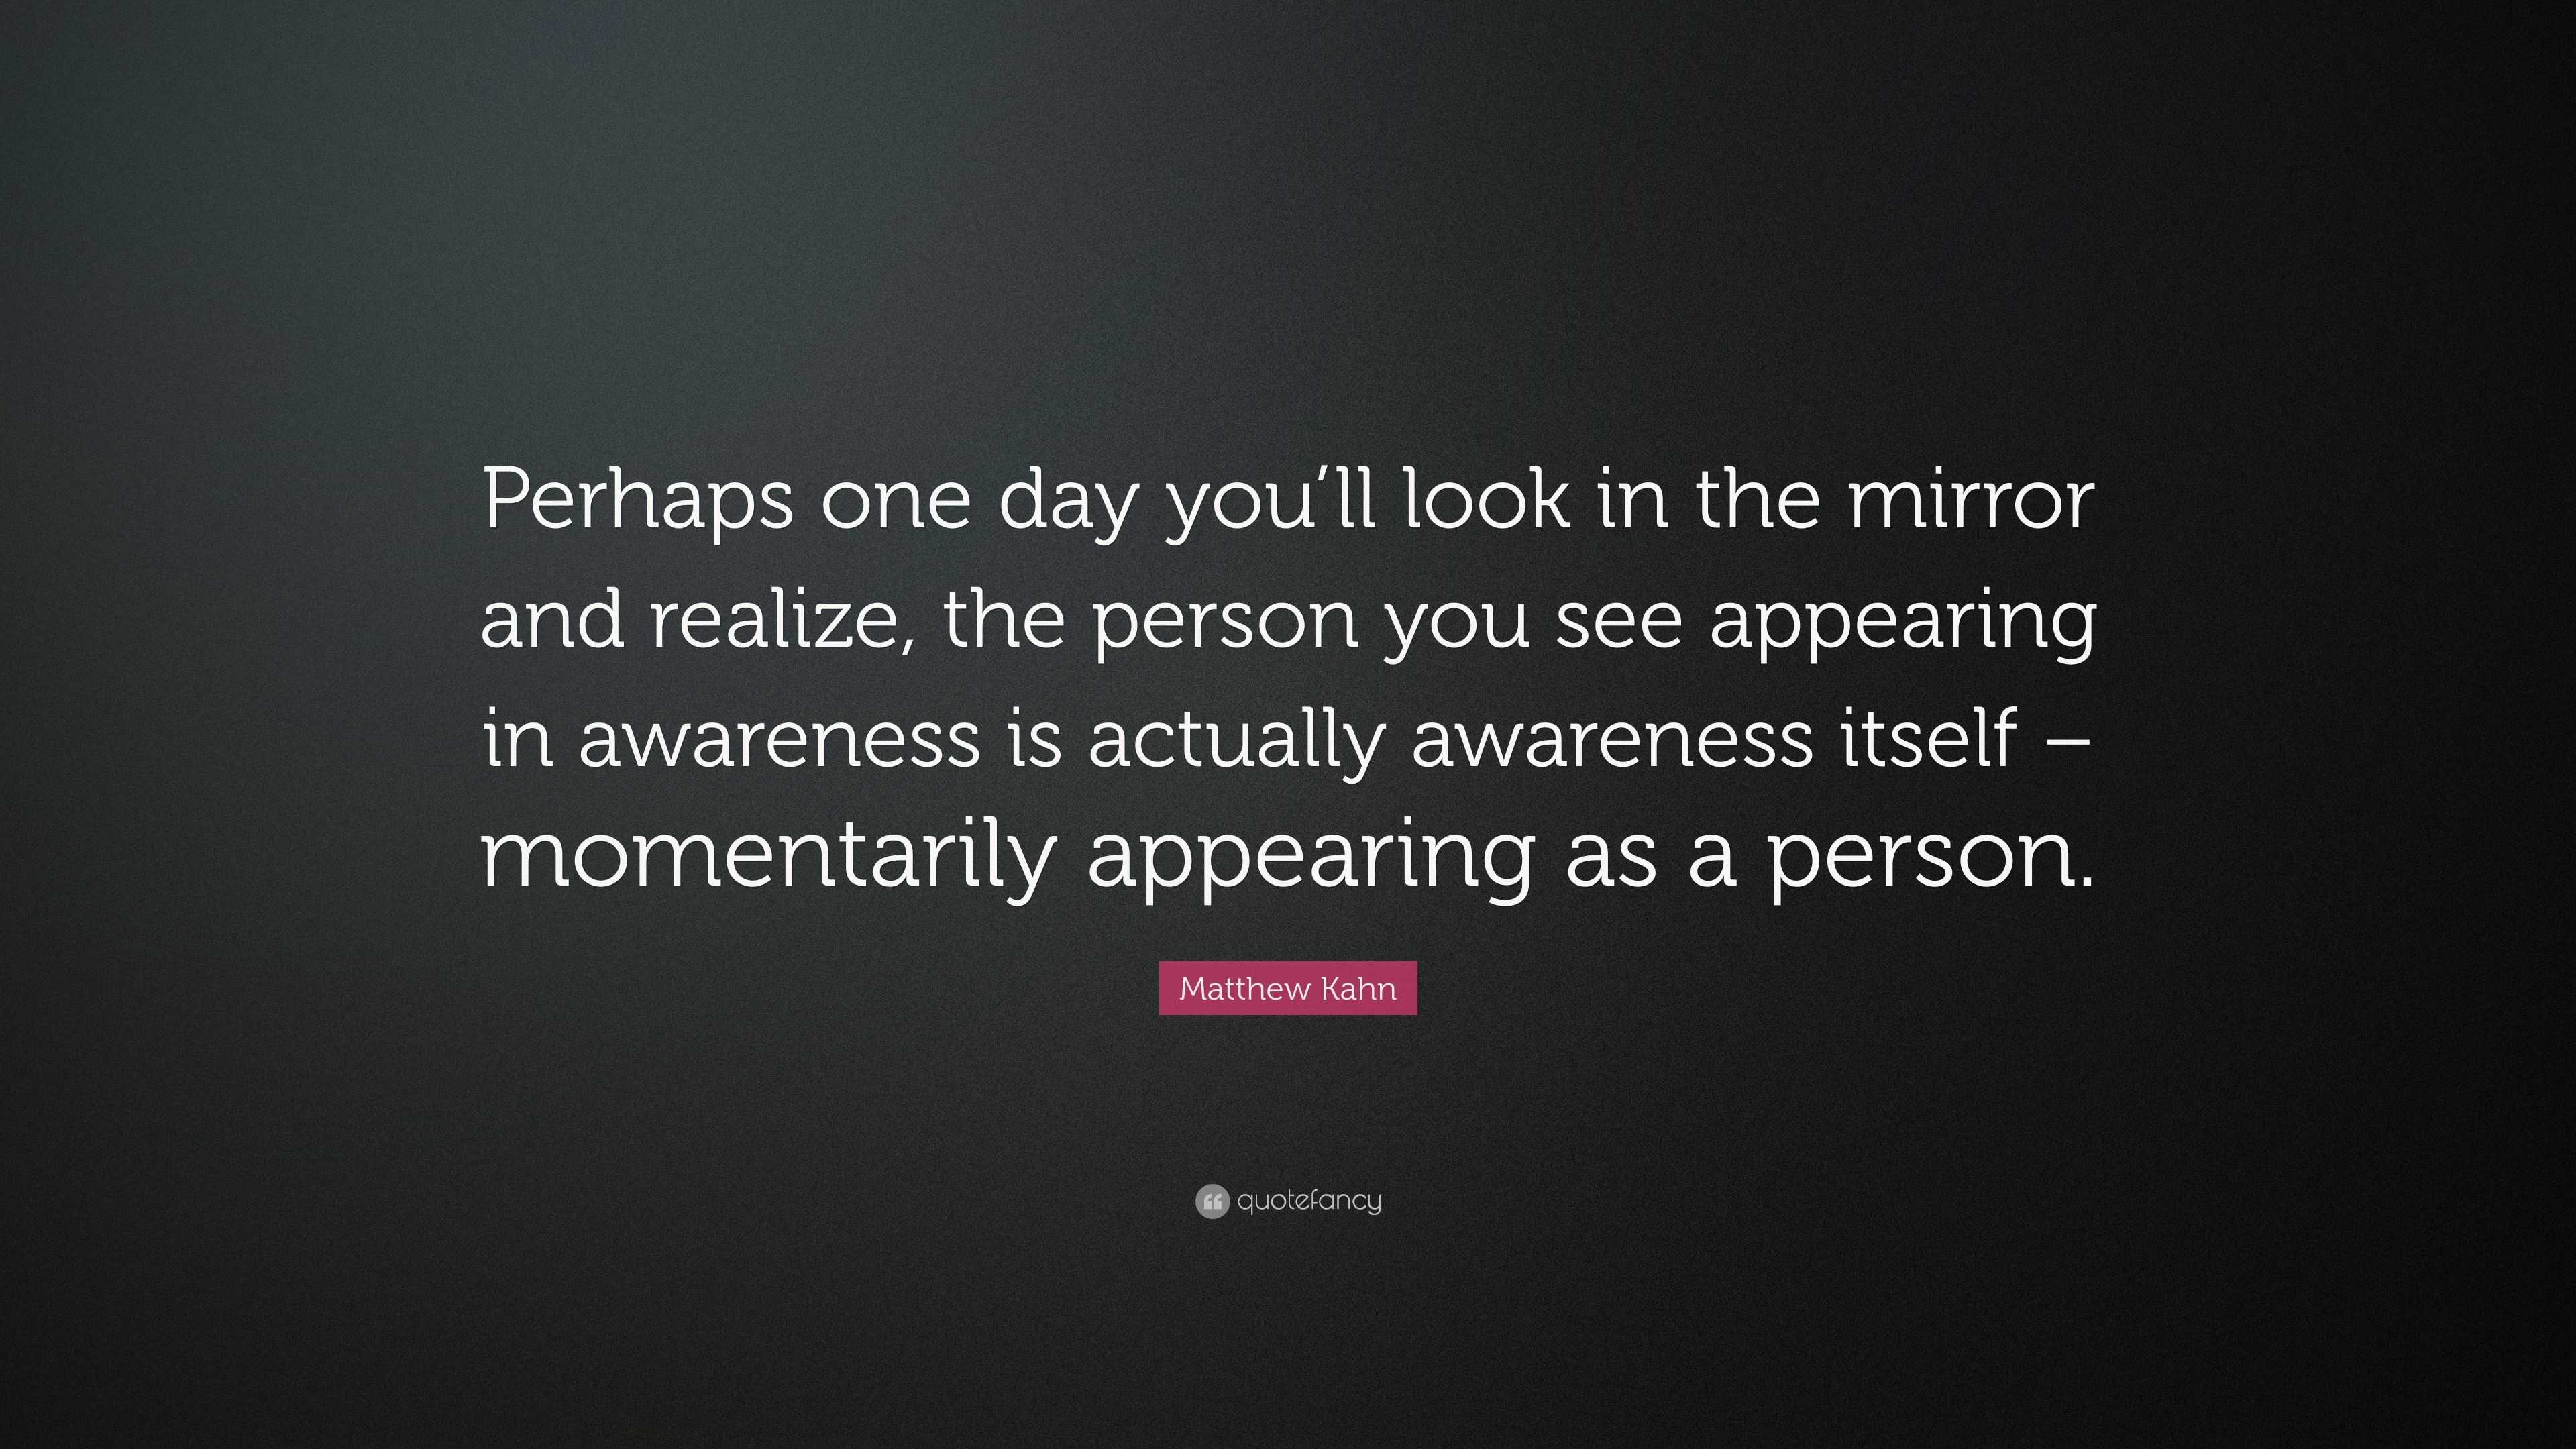 Matthew Kahn Quote “perhaps One Day You’ll Look In The Mirror And Realize The Person You See